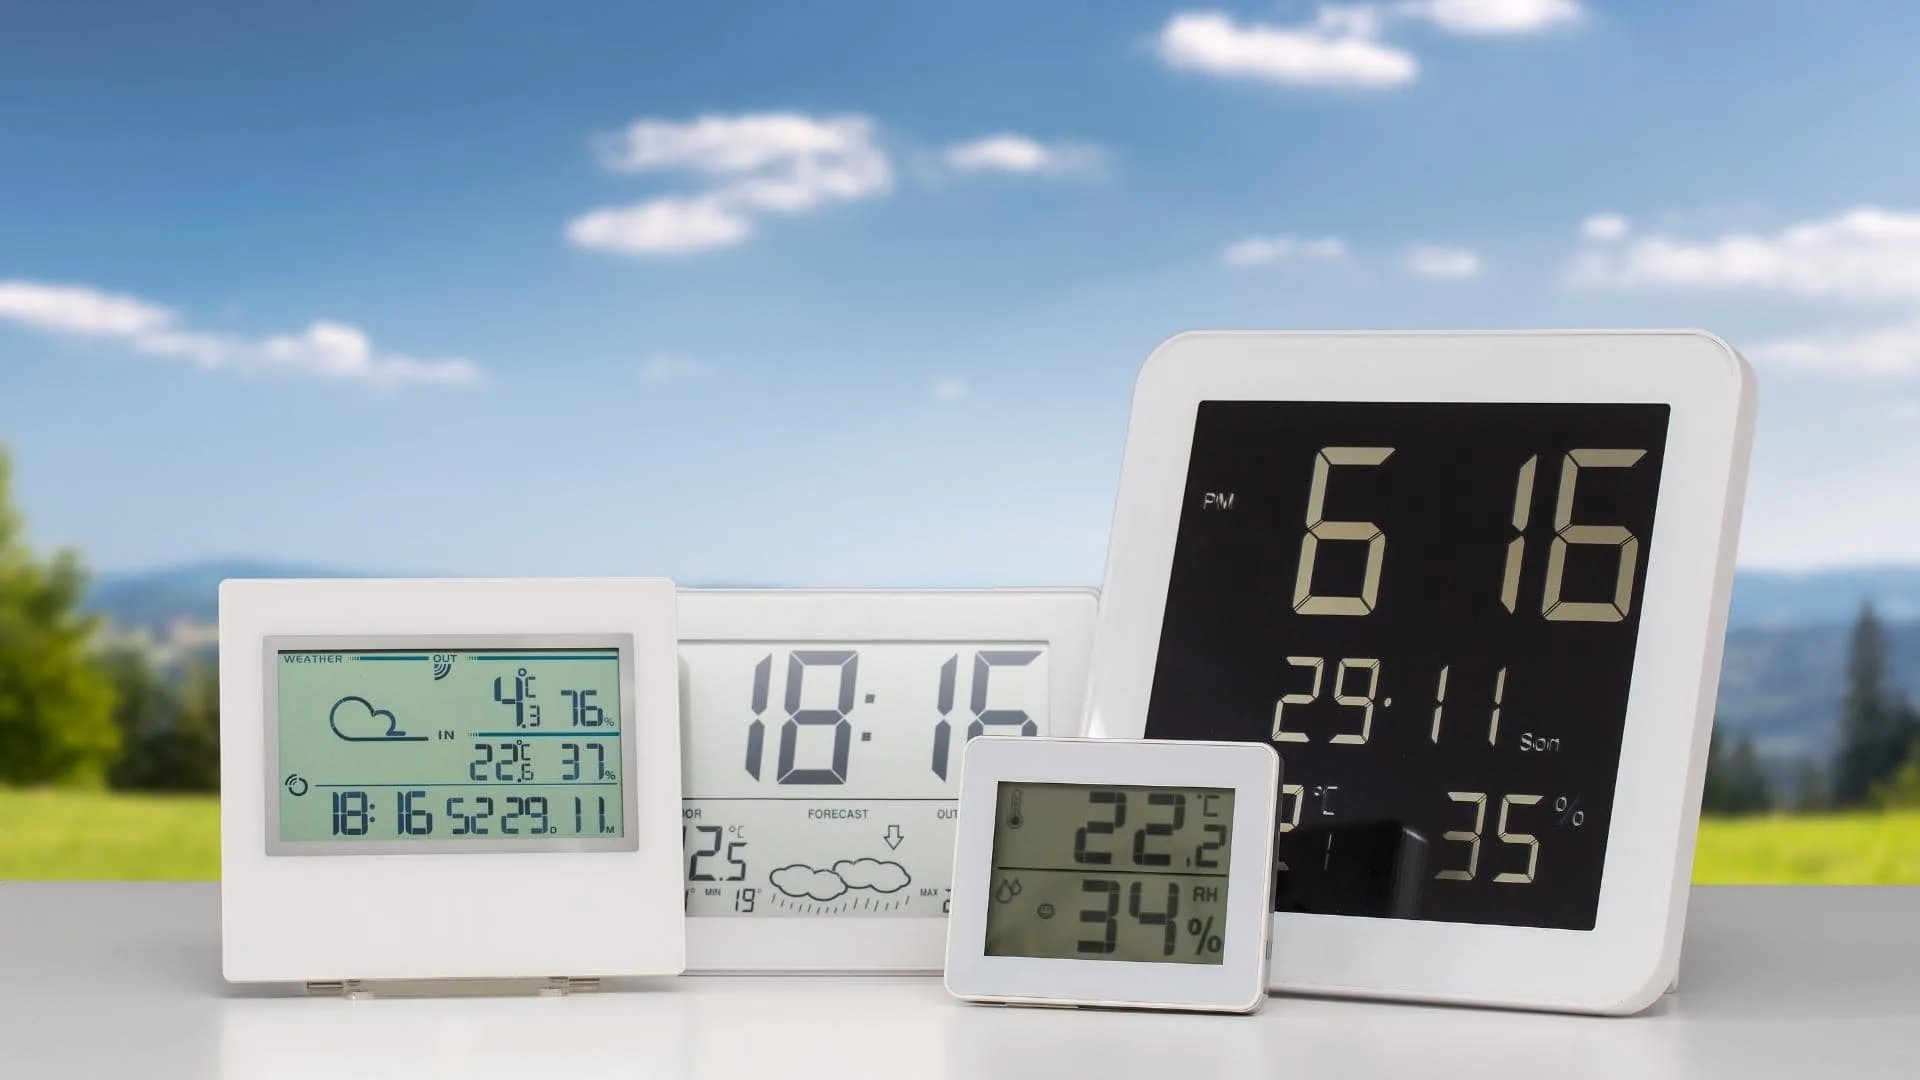 Photo of four different weather station screens